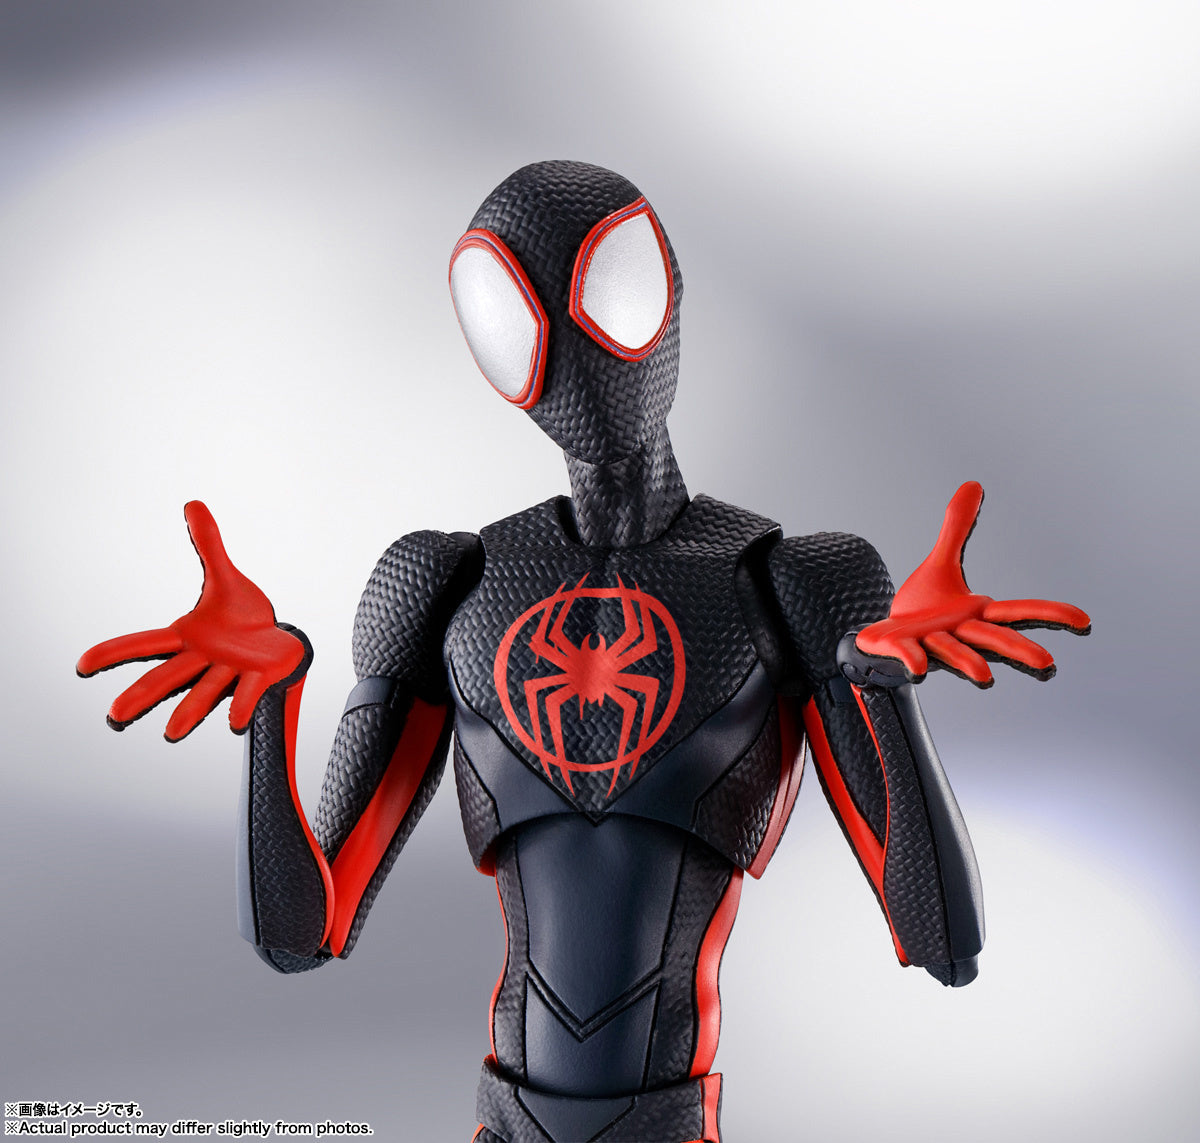 Bandai - S.H.Figuarts - Spider-Man: Across the Spider-Verse - Spider-Man (Miles Morales) - Marvelous Toys